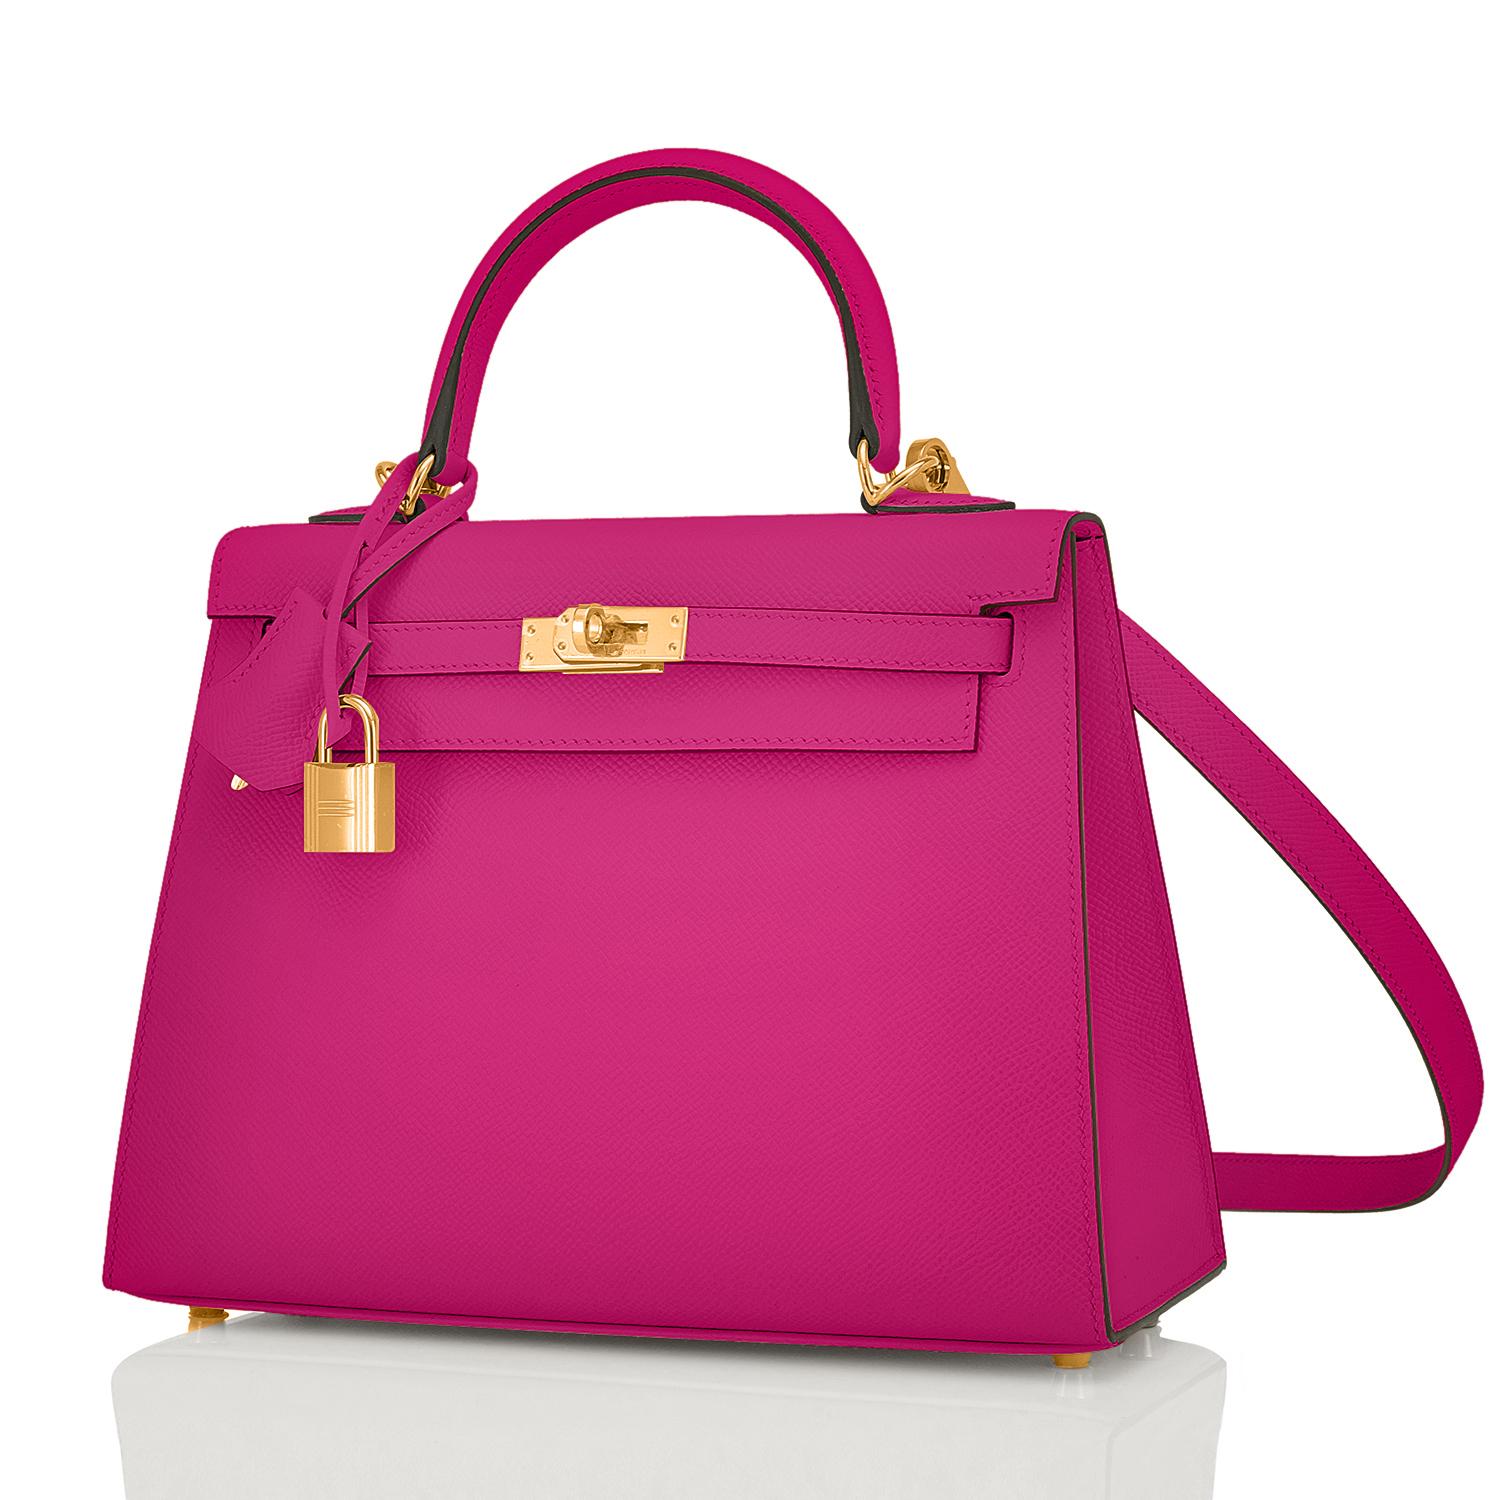 Hermes Kelly 25 Rose Pourpre Pink Epsom Sellier Bag Gold Y Stamp, 2020
Devastatingly gorgeous! Beyond darling and super chic!
Just purchased from Hermes store; bag bears new interior 2020 Stamp.
Brand New in Box. Store Fresh. Pristine Condition